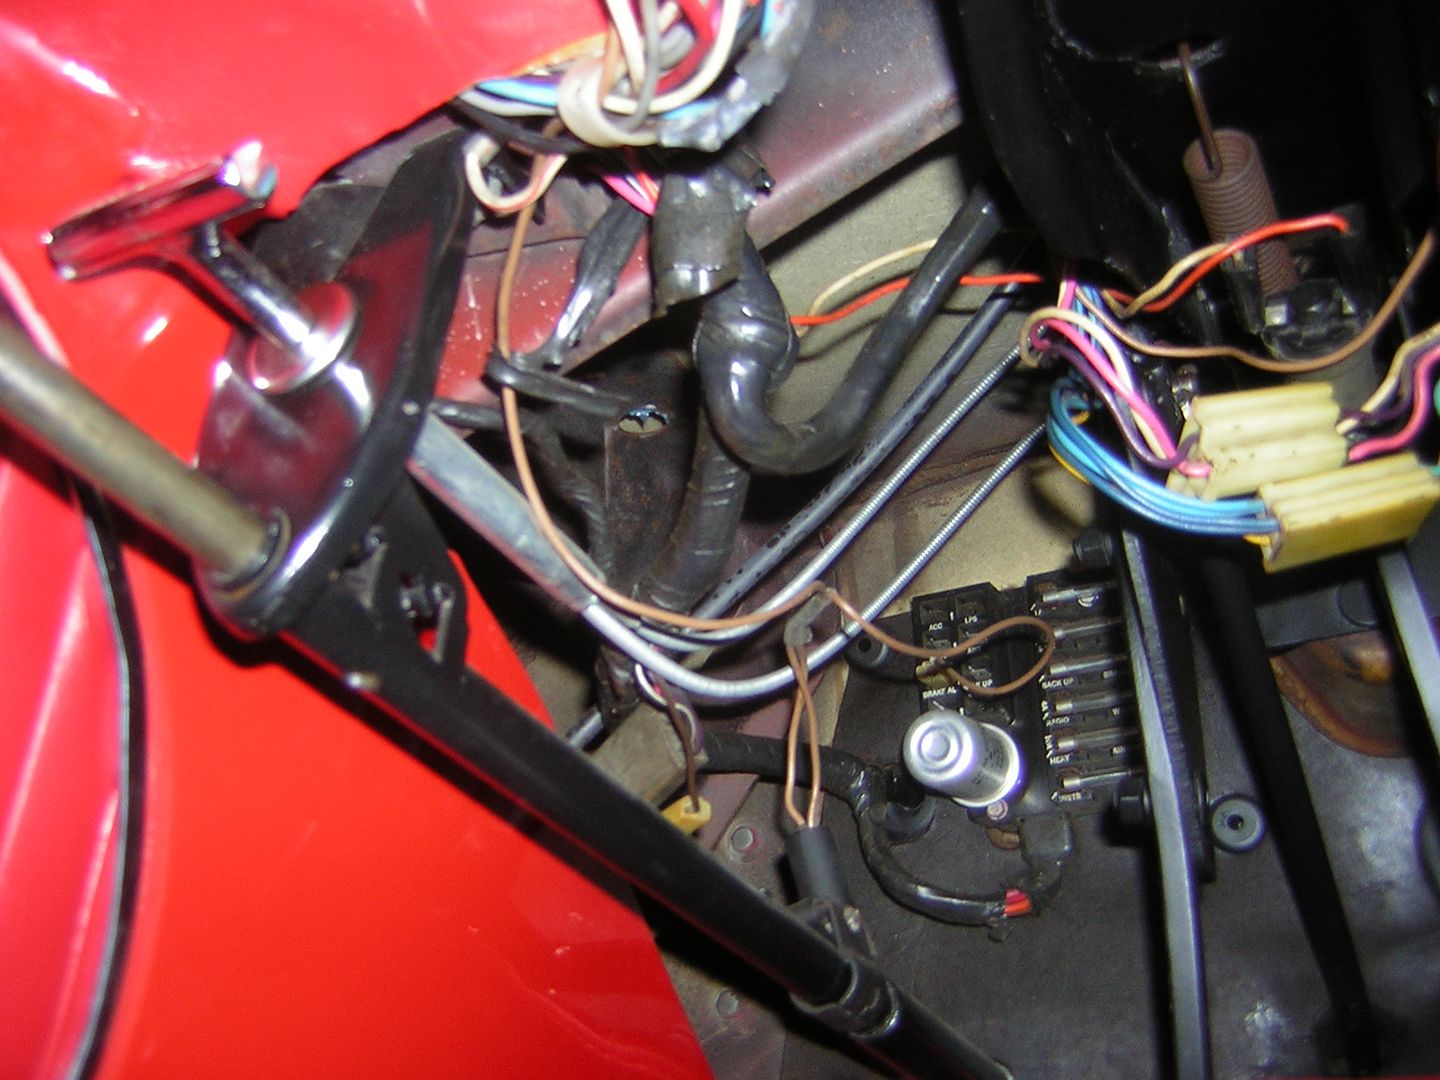 59 Main Wiring Harness Routing Question - CorvetteForum - Chevrolet